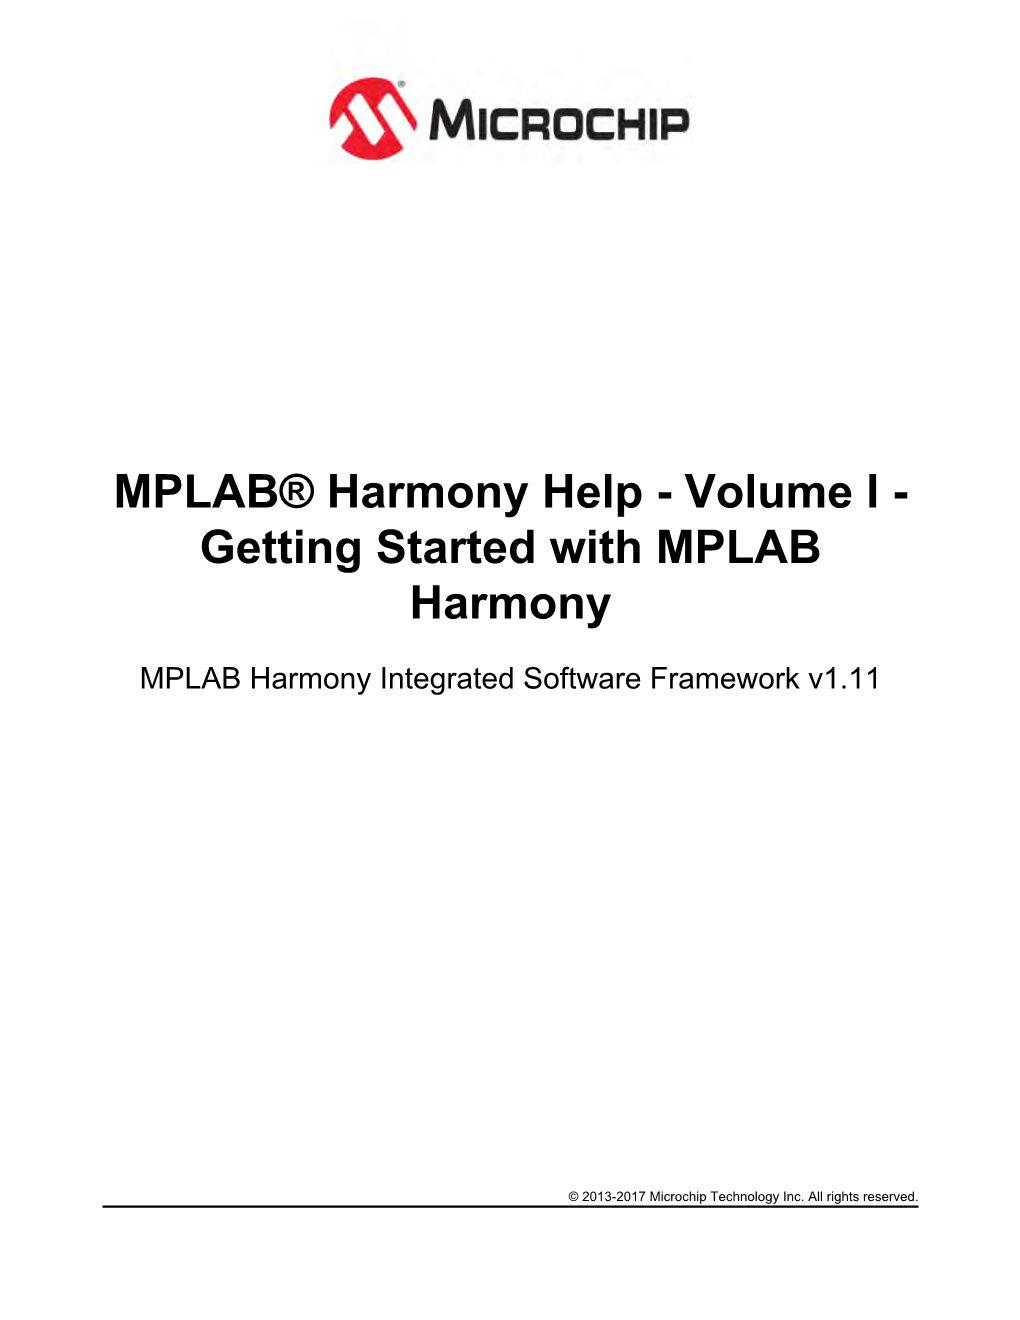 Volume I Getting Started with MPLAB Harmony